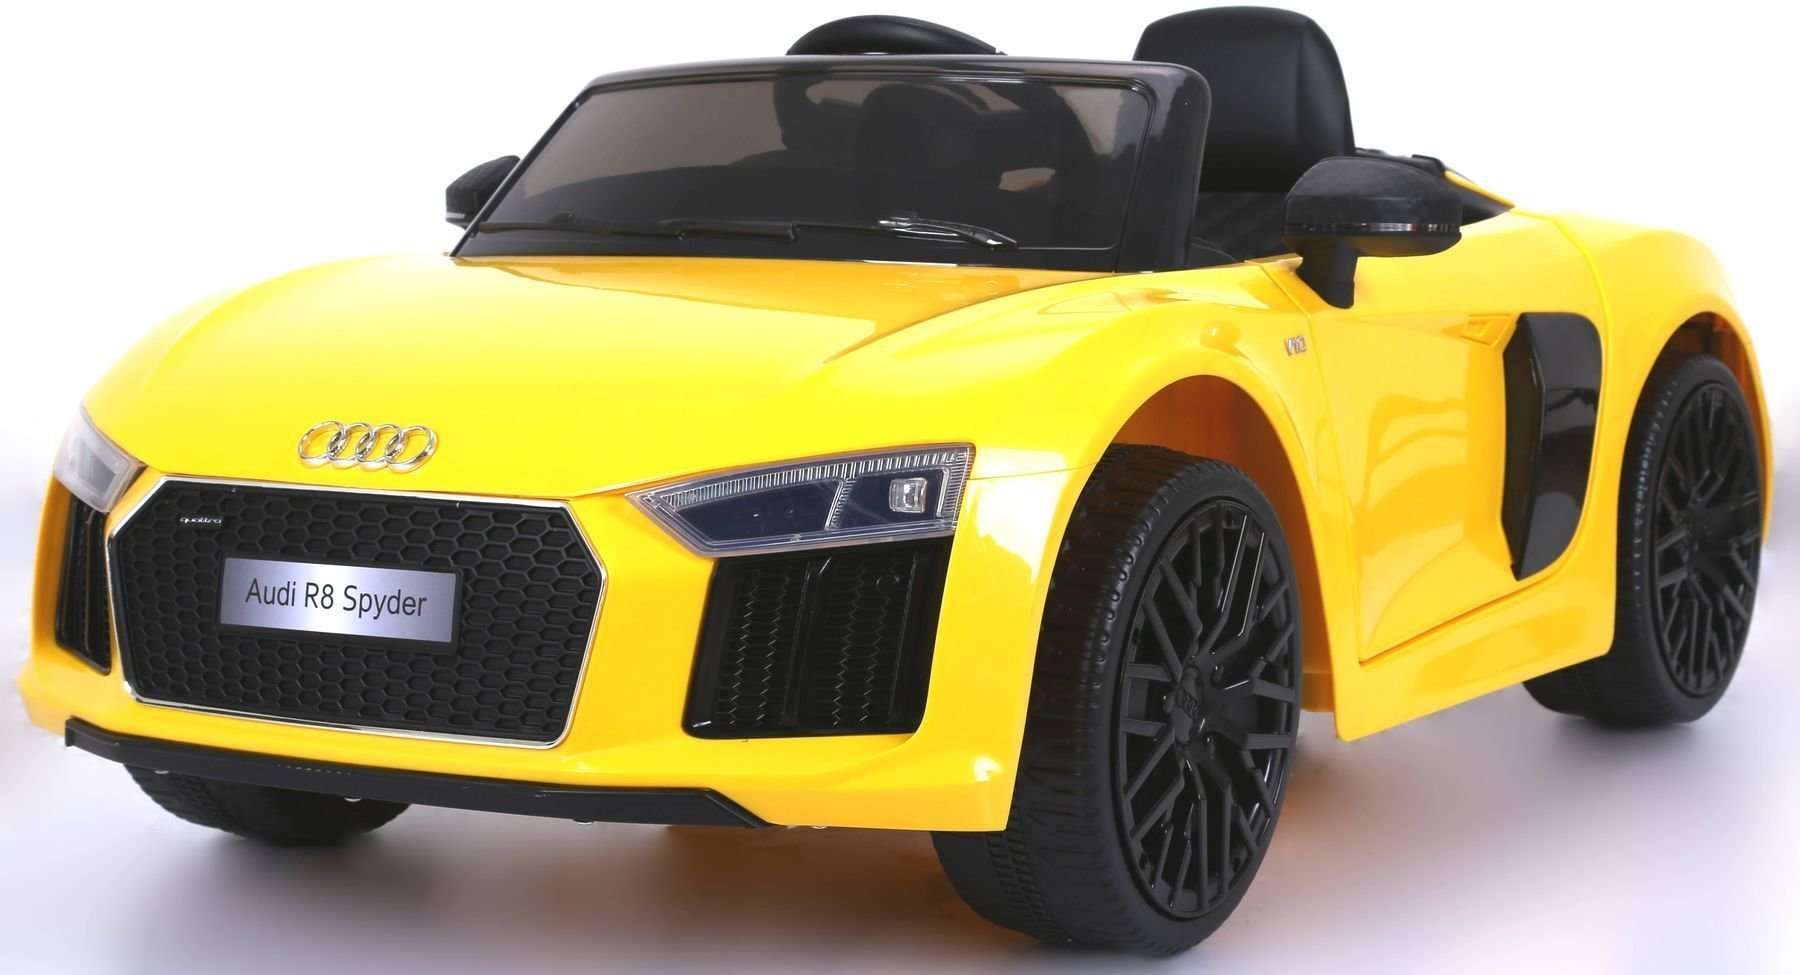 Electric Toy Car Beneo Electric Ride-On Car Audi R8 Spyder Yellow